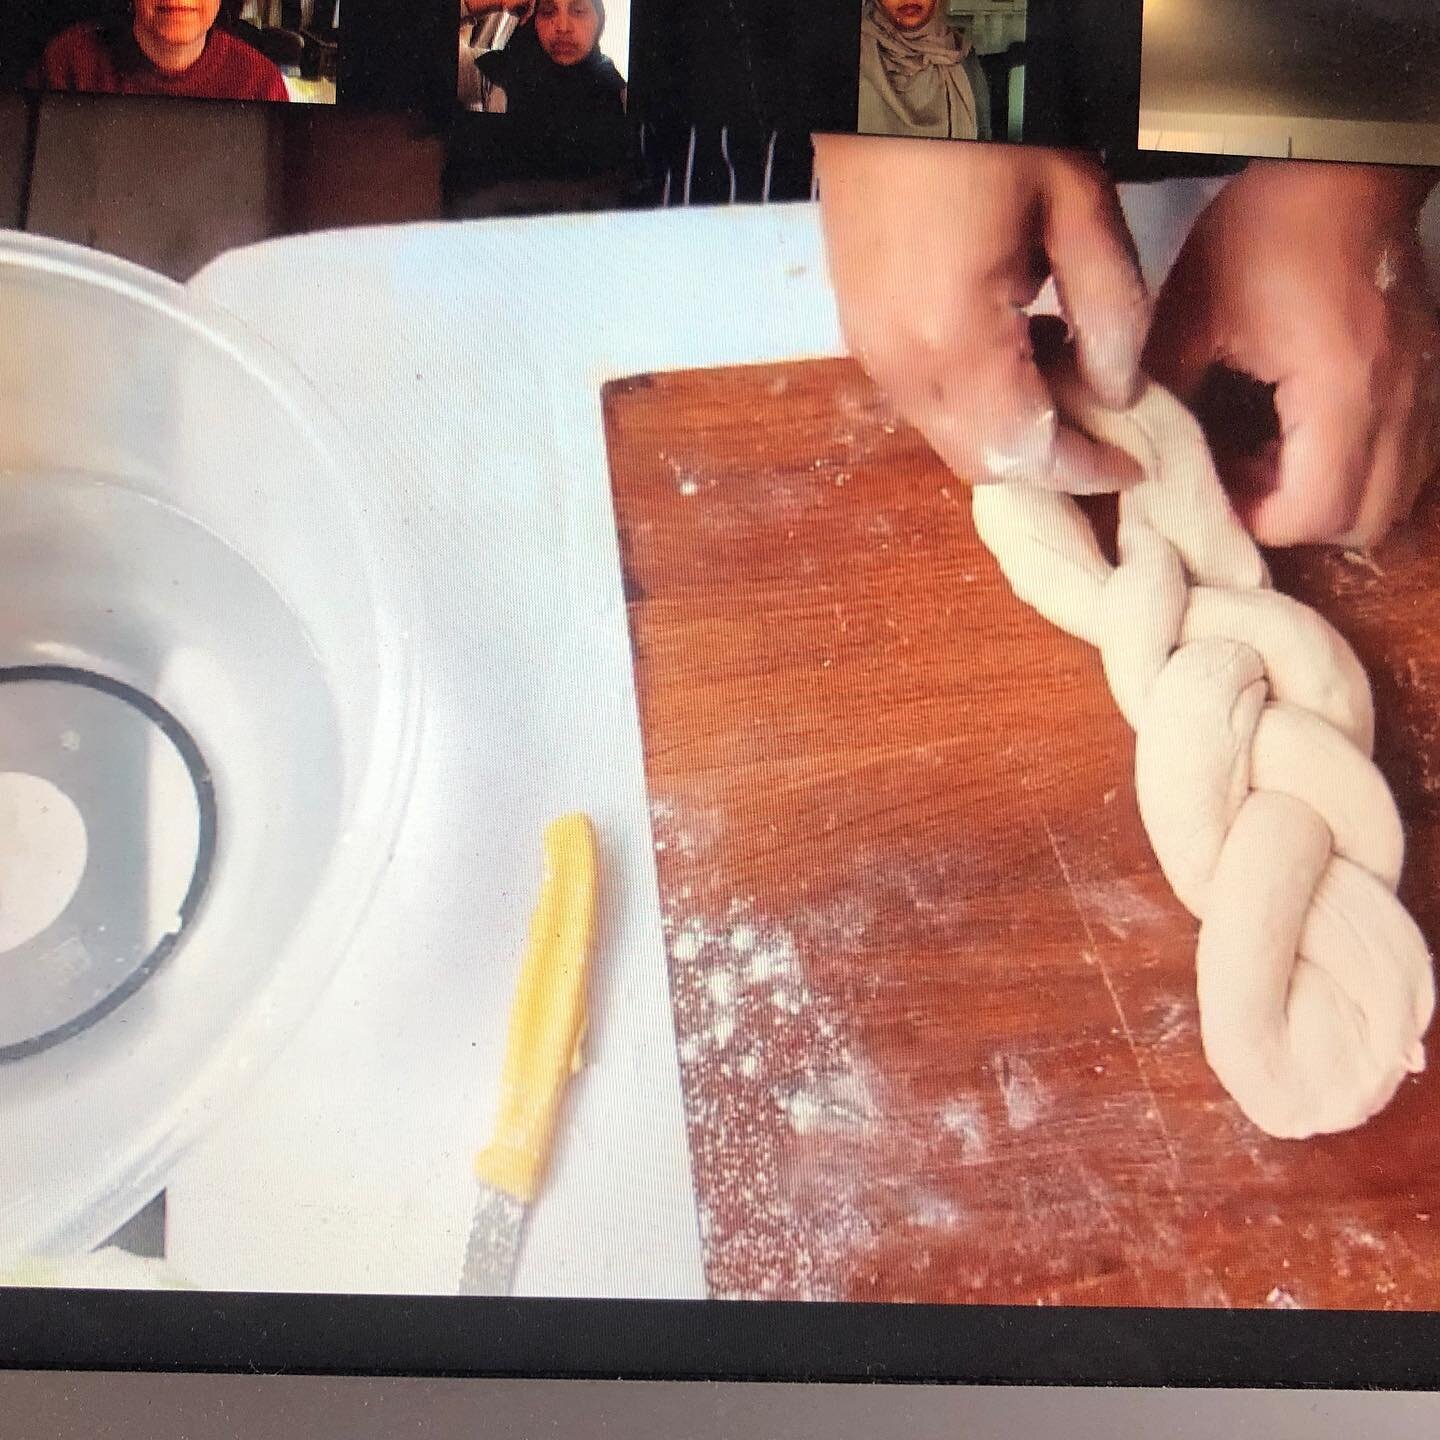 This morning in our MARKit bakery session, @albert.smith.948494 taught us all about shaping our bread to create different beautifully shaped loaves, rolls, focaccia and fougasse, flatbreads and samoon 🥯 🥖 🍞 
.
.
.
#CommunityBakery #WithRefugees #M